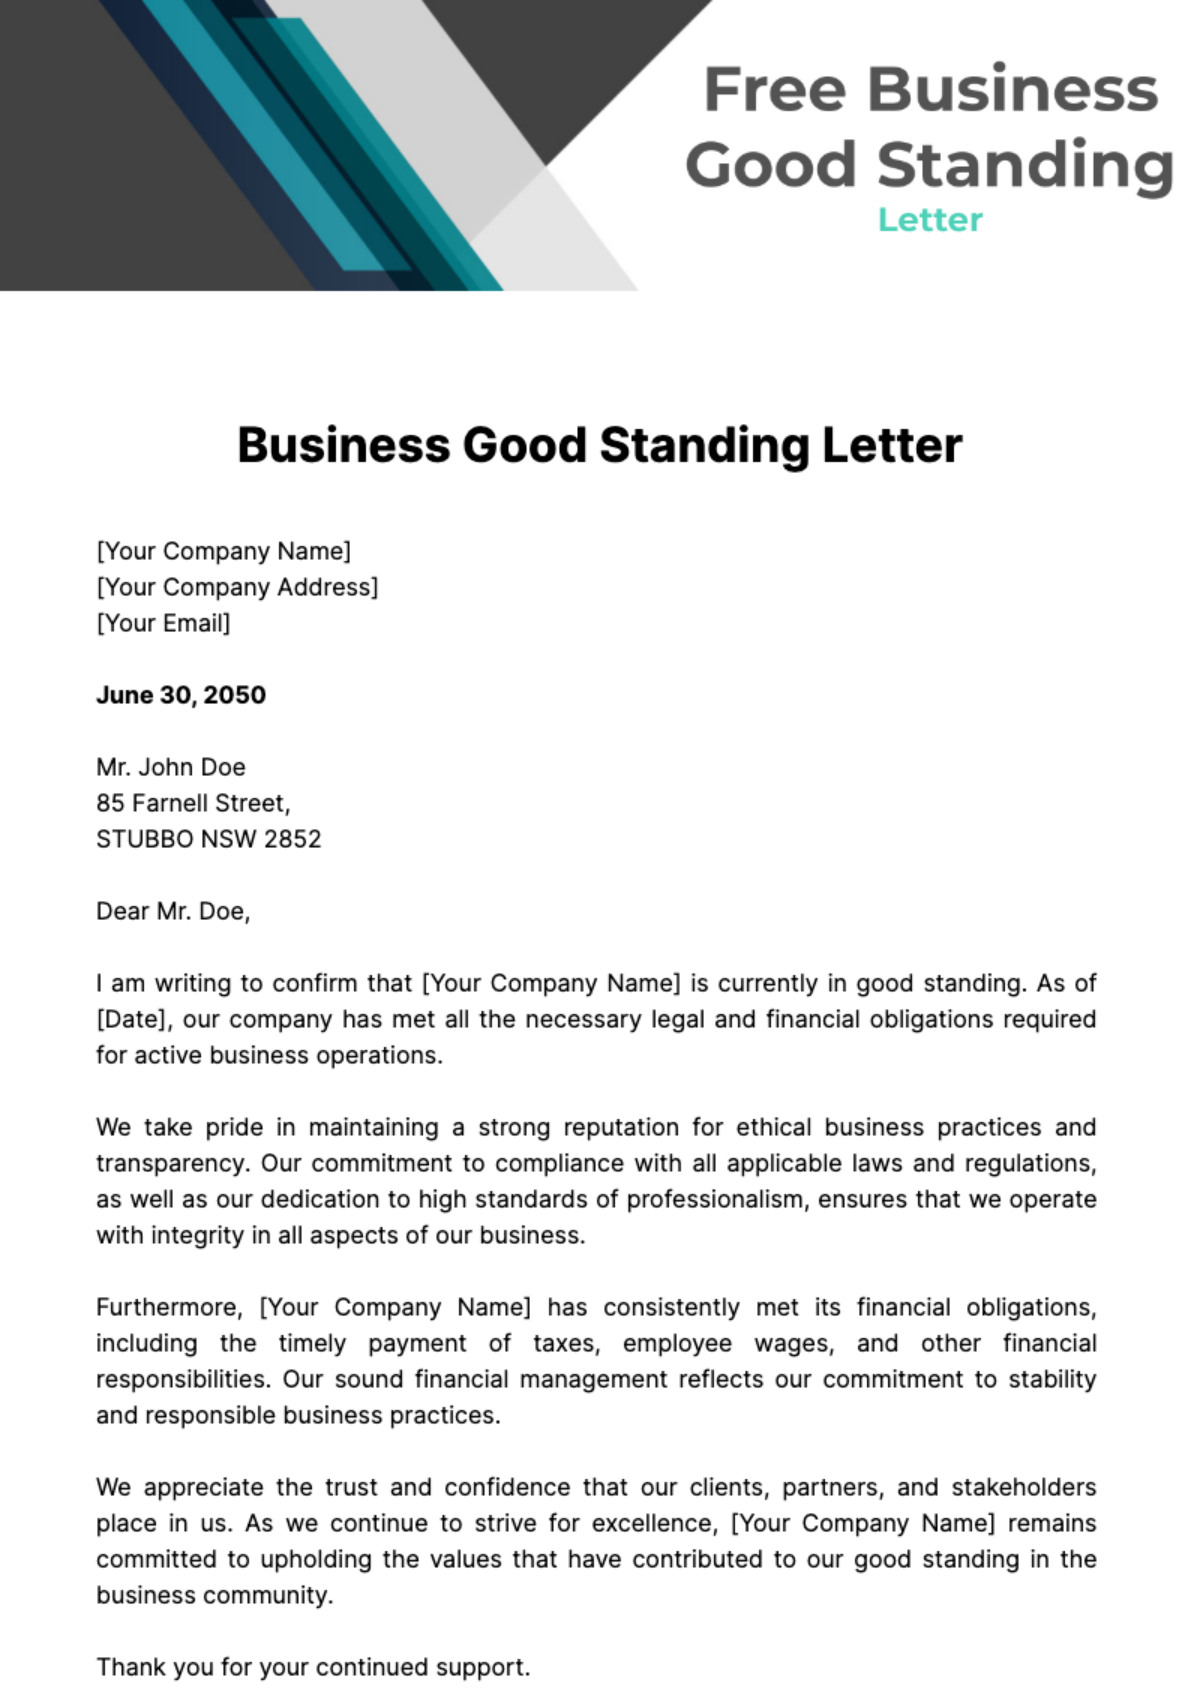 Business Good Standing Letter Template